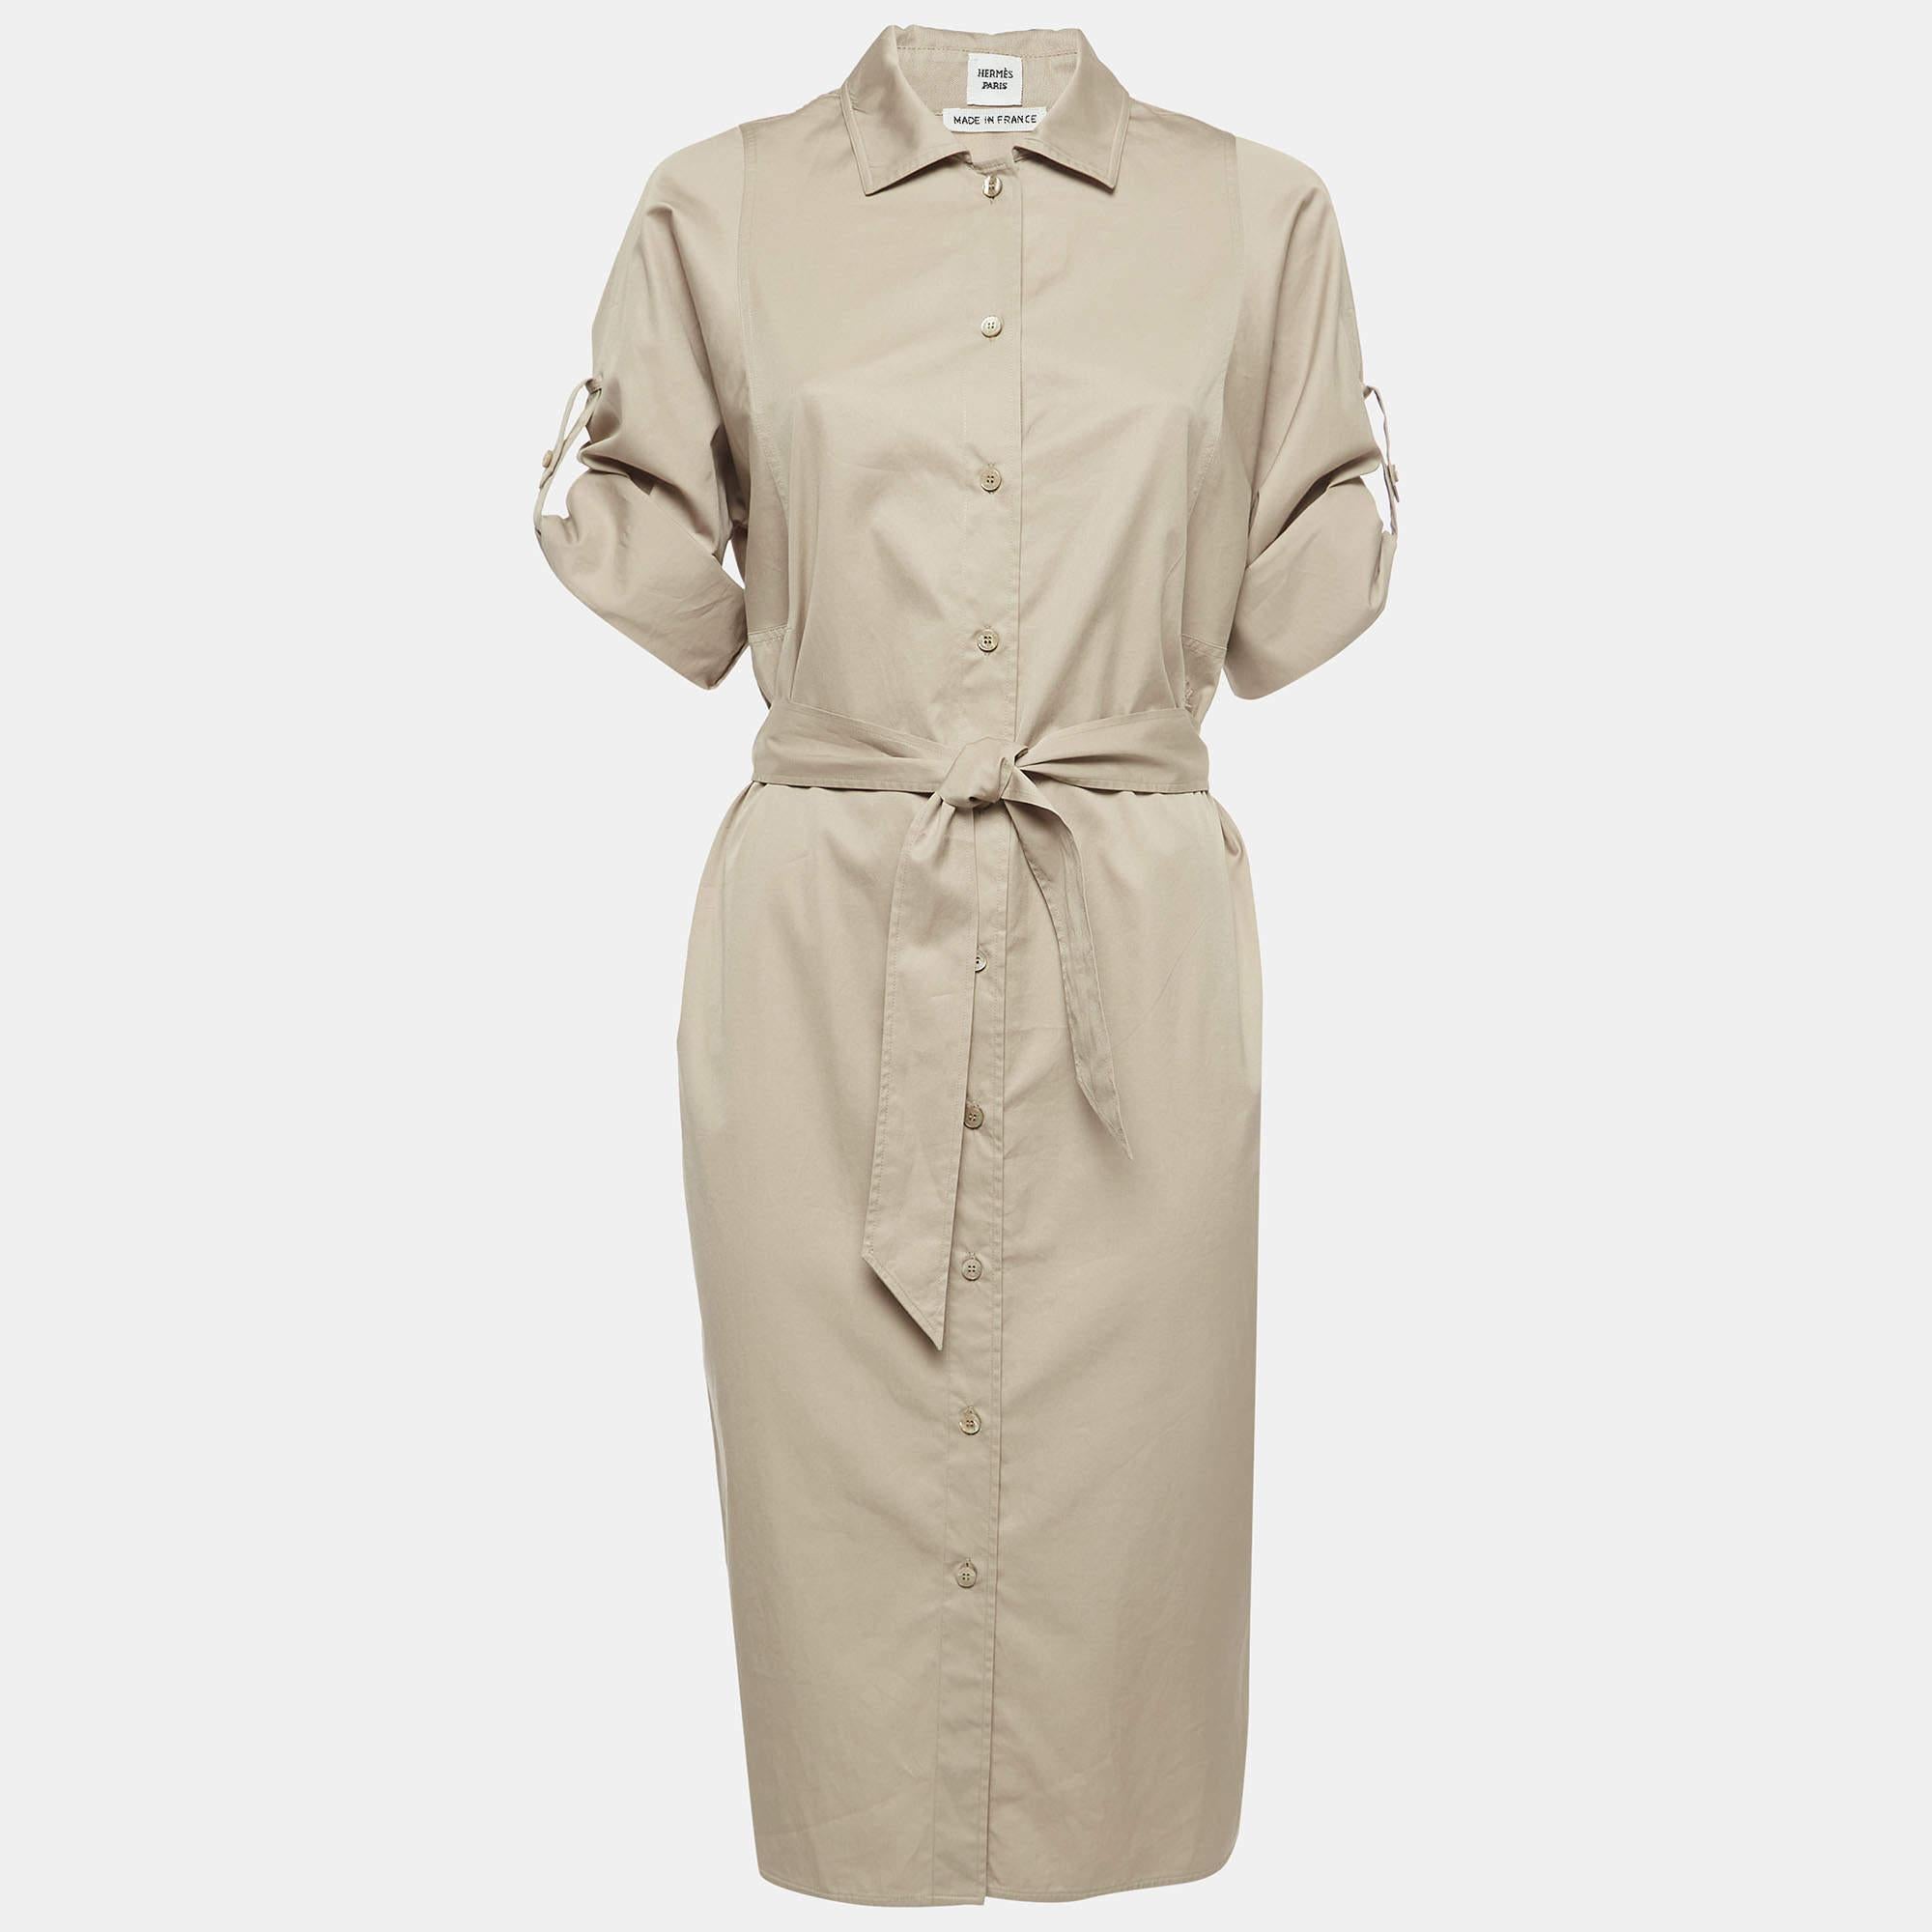 Indulge in effortless sophistication with the Hermèsdress. Crafted with exquisite detail, this dress boasts timeless elegance. Featuring subtle logo embroidery, a flattering belted waist, and a midi length, it effortlessly merges style and comfort